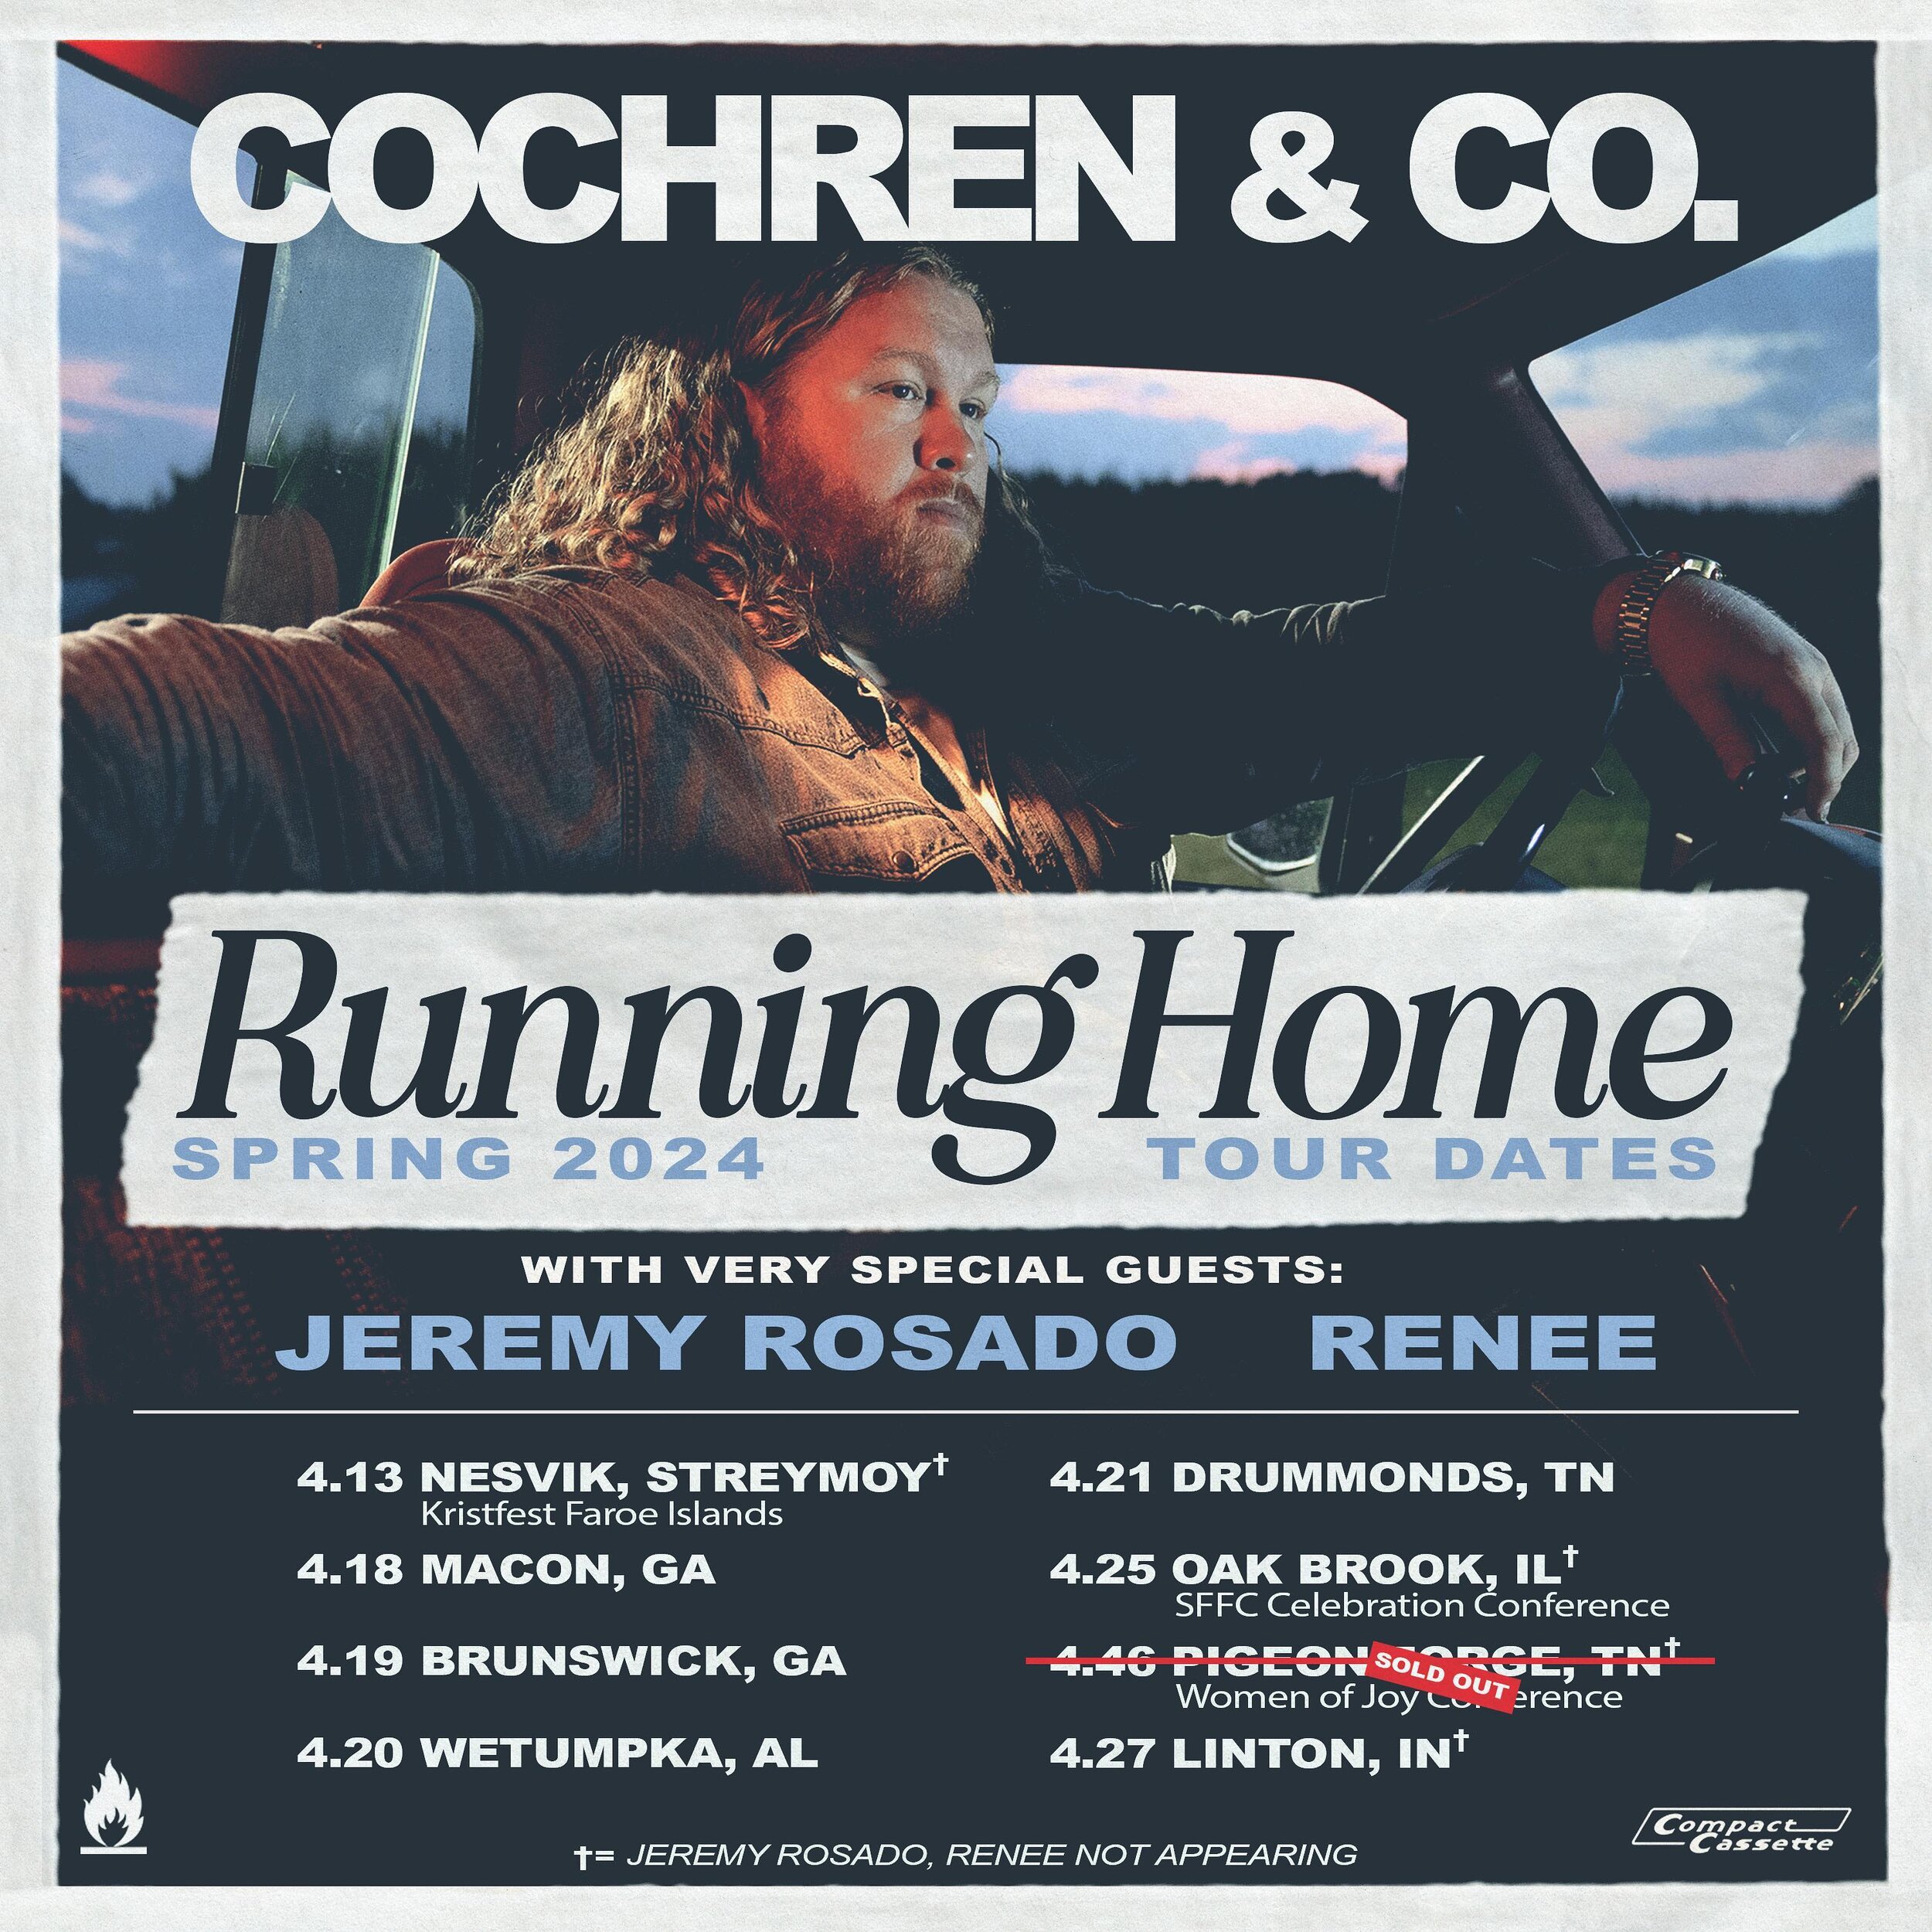 We are so excited to be hitting the road again in April for a string of headline shows along with our friends @iamjeremyrosado @reneemusicofficial for select dates.  Get your tickets now for these impactful nights at cochrenmusic.com/tour 🙌🔥

4.13 